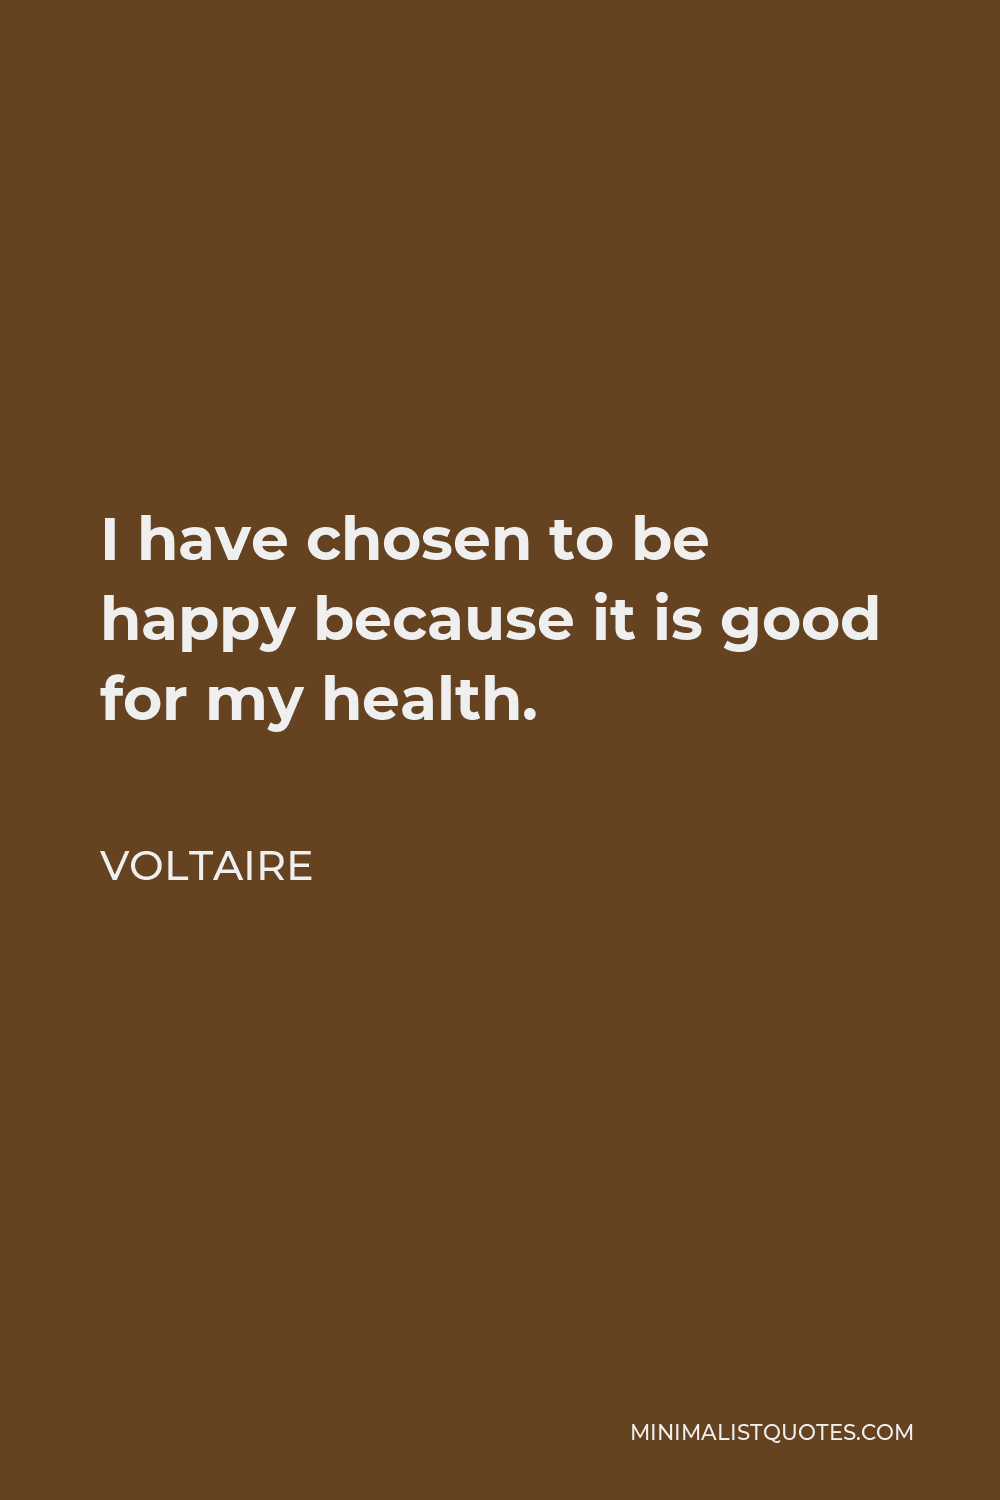 Voltaire Quote - I have chosen to be happy because it is good for my health.